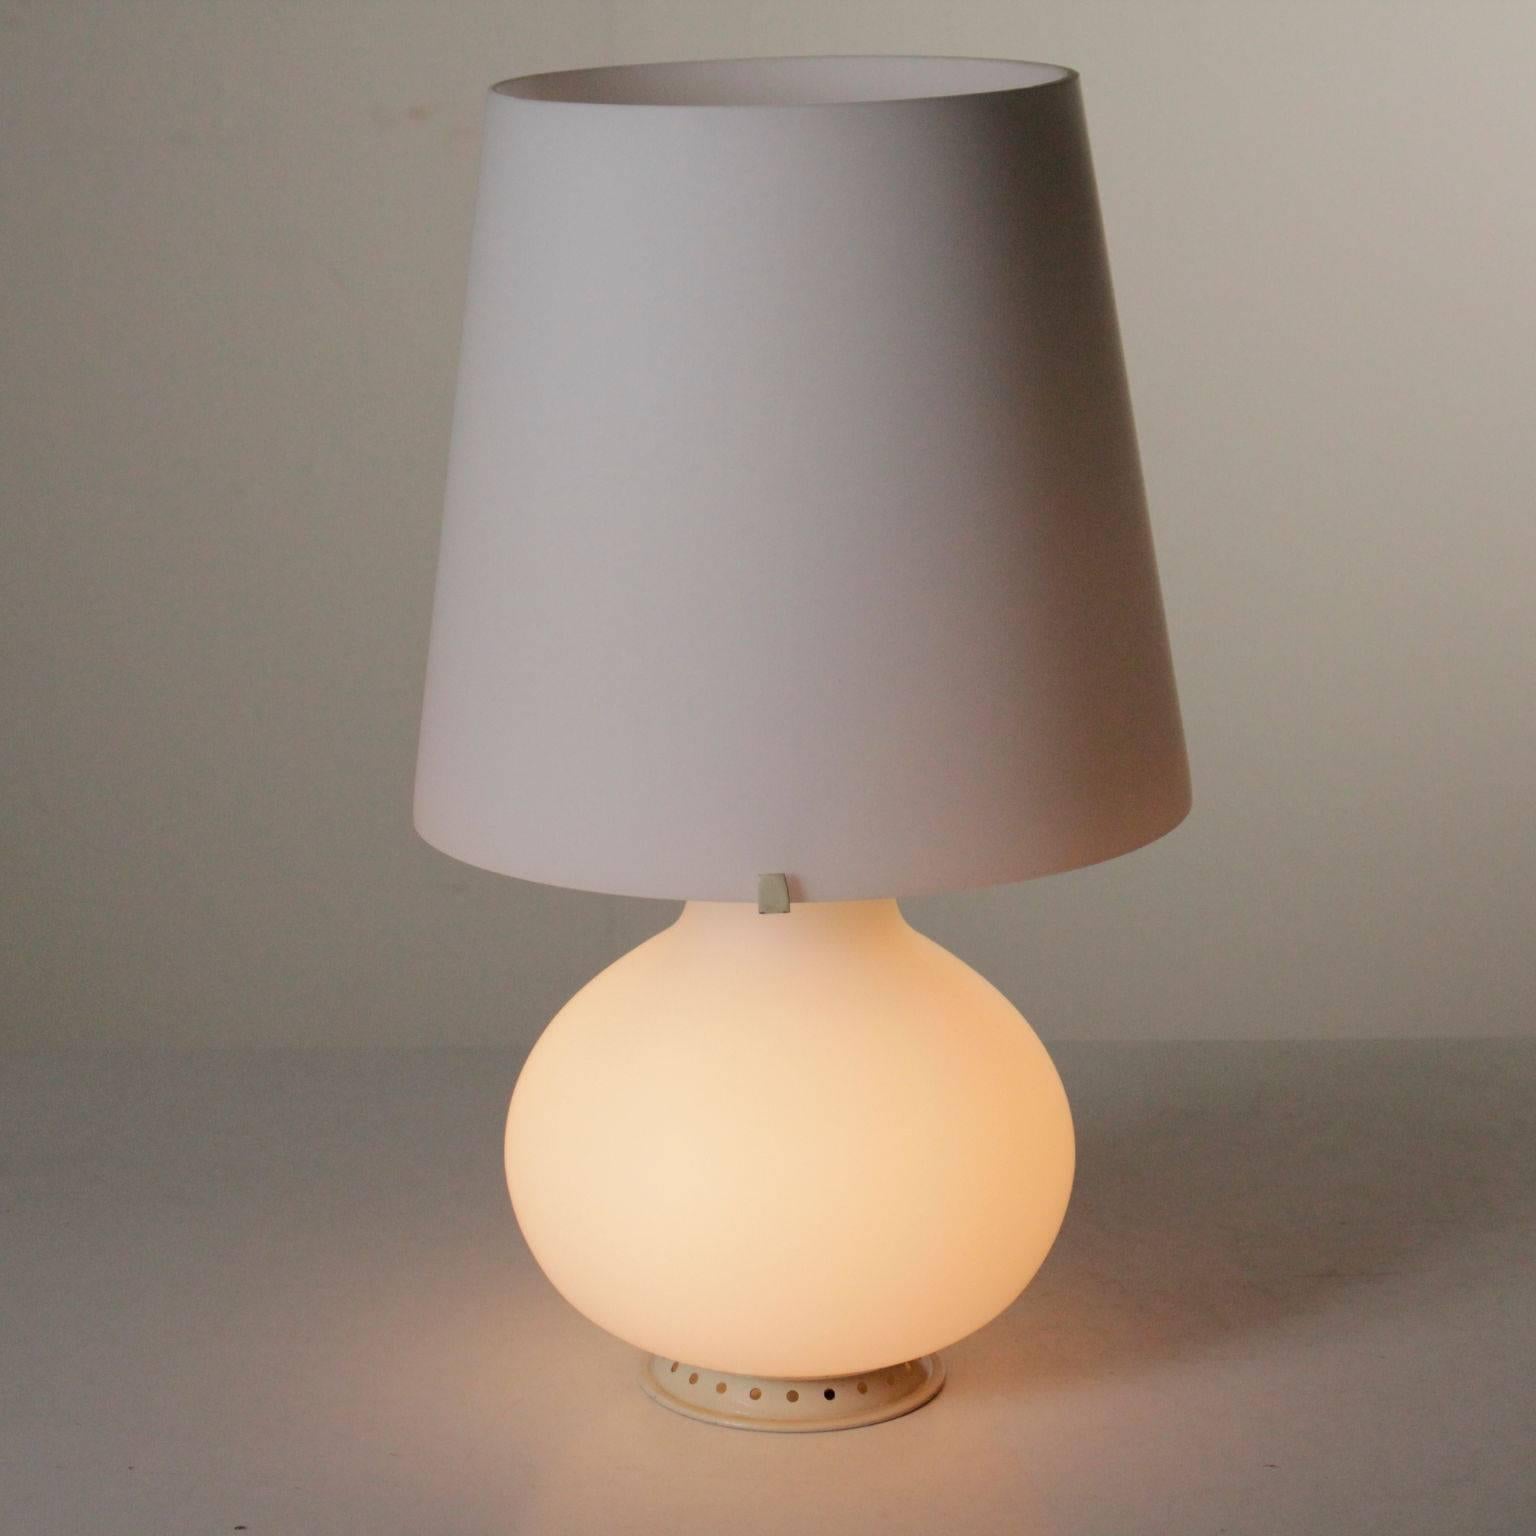 Mid-Century Modern Table Lamp Designed for FontanaArte by Max Ingrand Vintage, Italy, 1960s-1970s